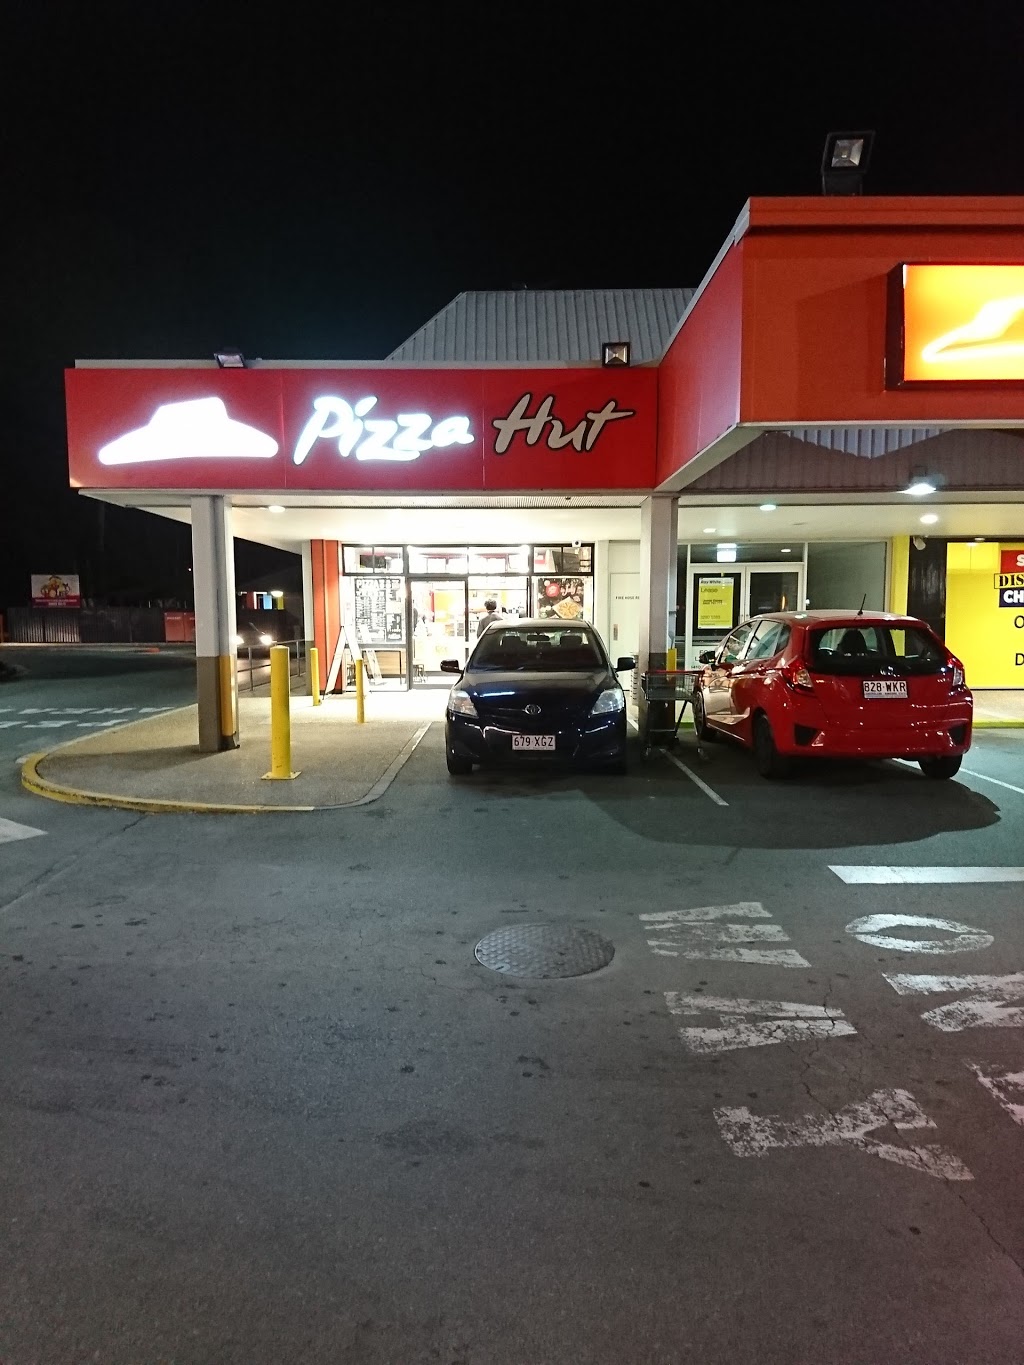 Pizza Hut Waterford West | meal delivery | Shop 29 Waterford West Shopping Plaza, 917 Kingston Rd, Waterford West QLD 4133, Australia | 131166 OR +61 131166